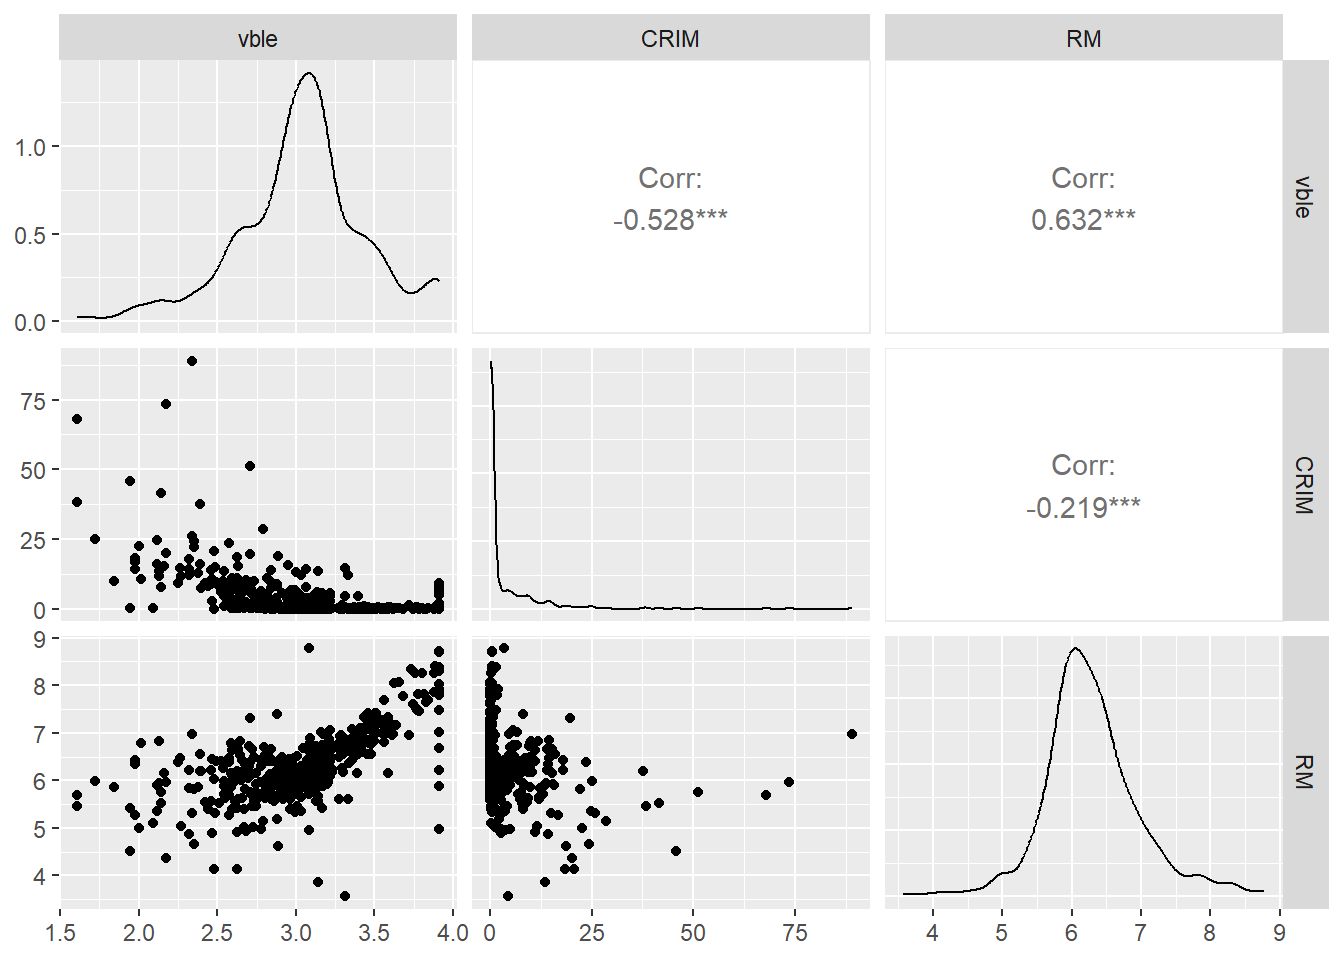 Relationship betwen the outcome variable logarithm of housing price (`vble`), and the covariates per capita crime (`CRIM`) and number of rooms (`RM`).